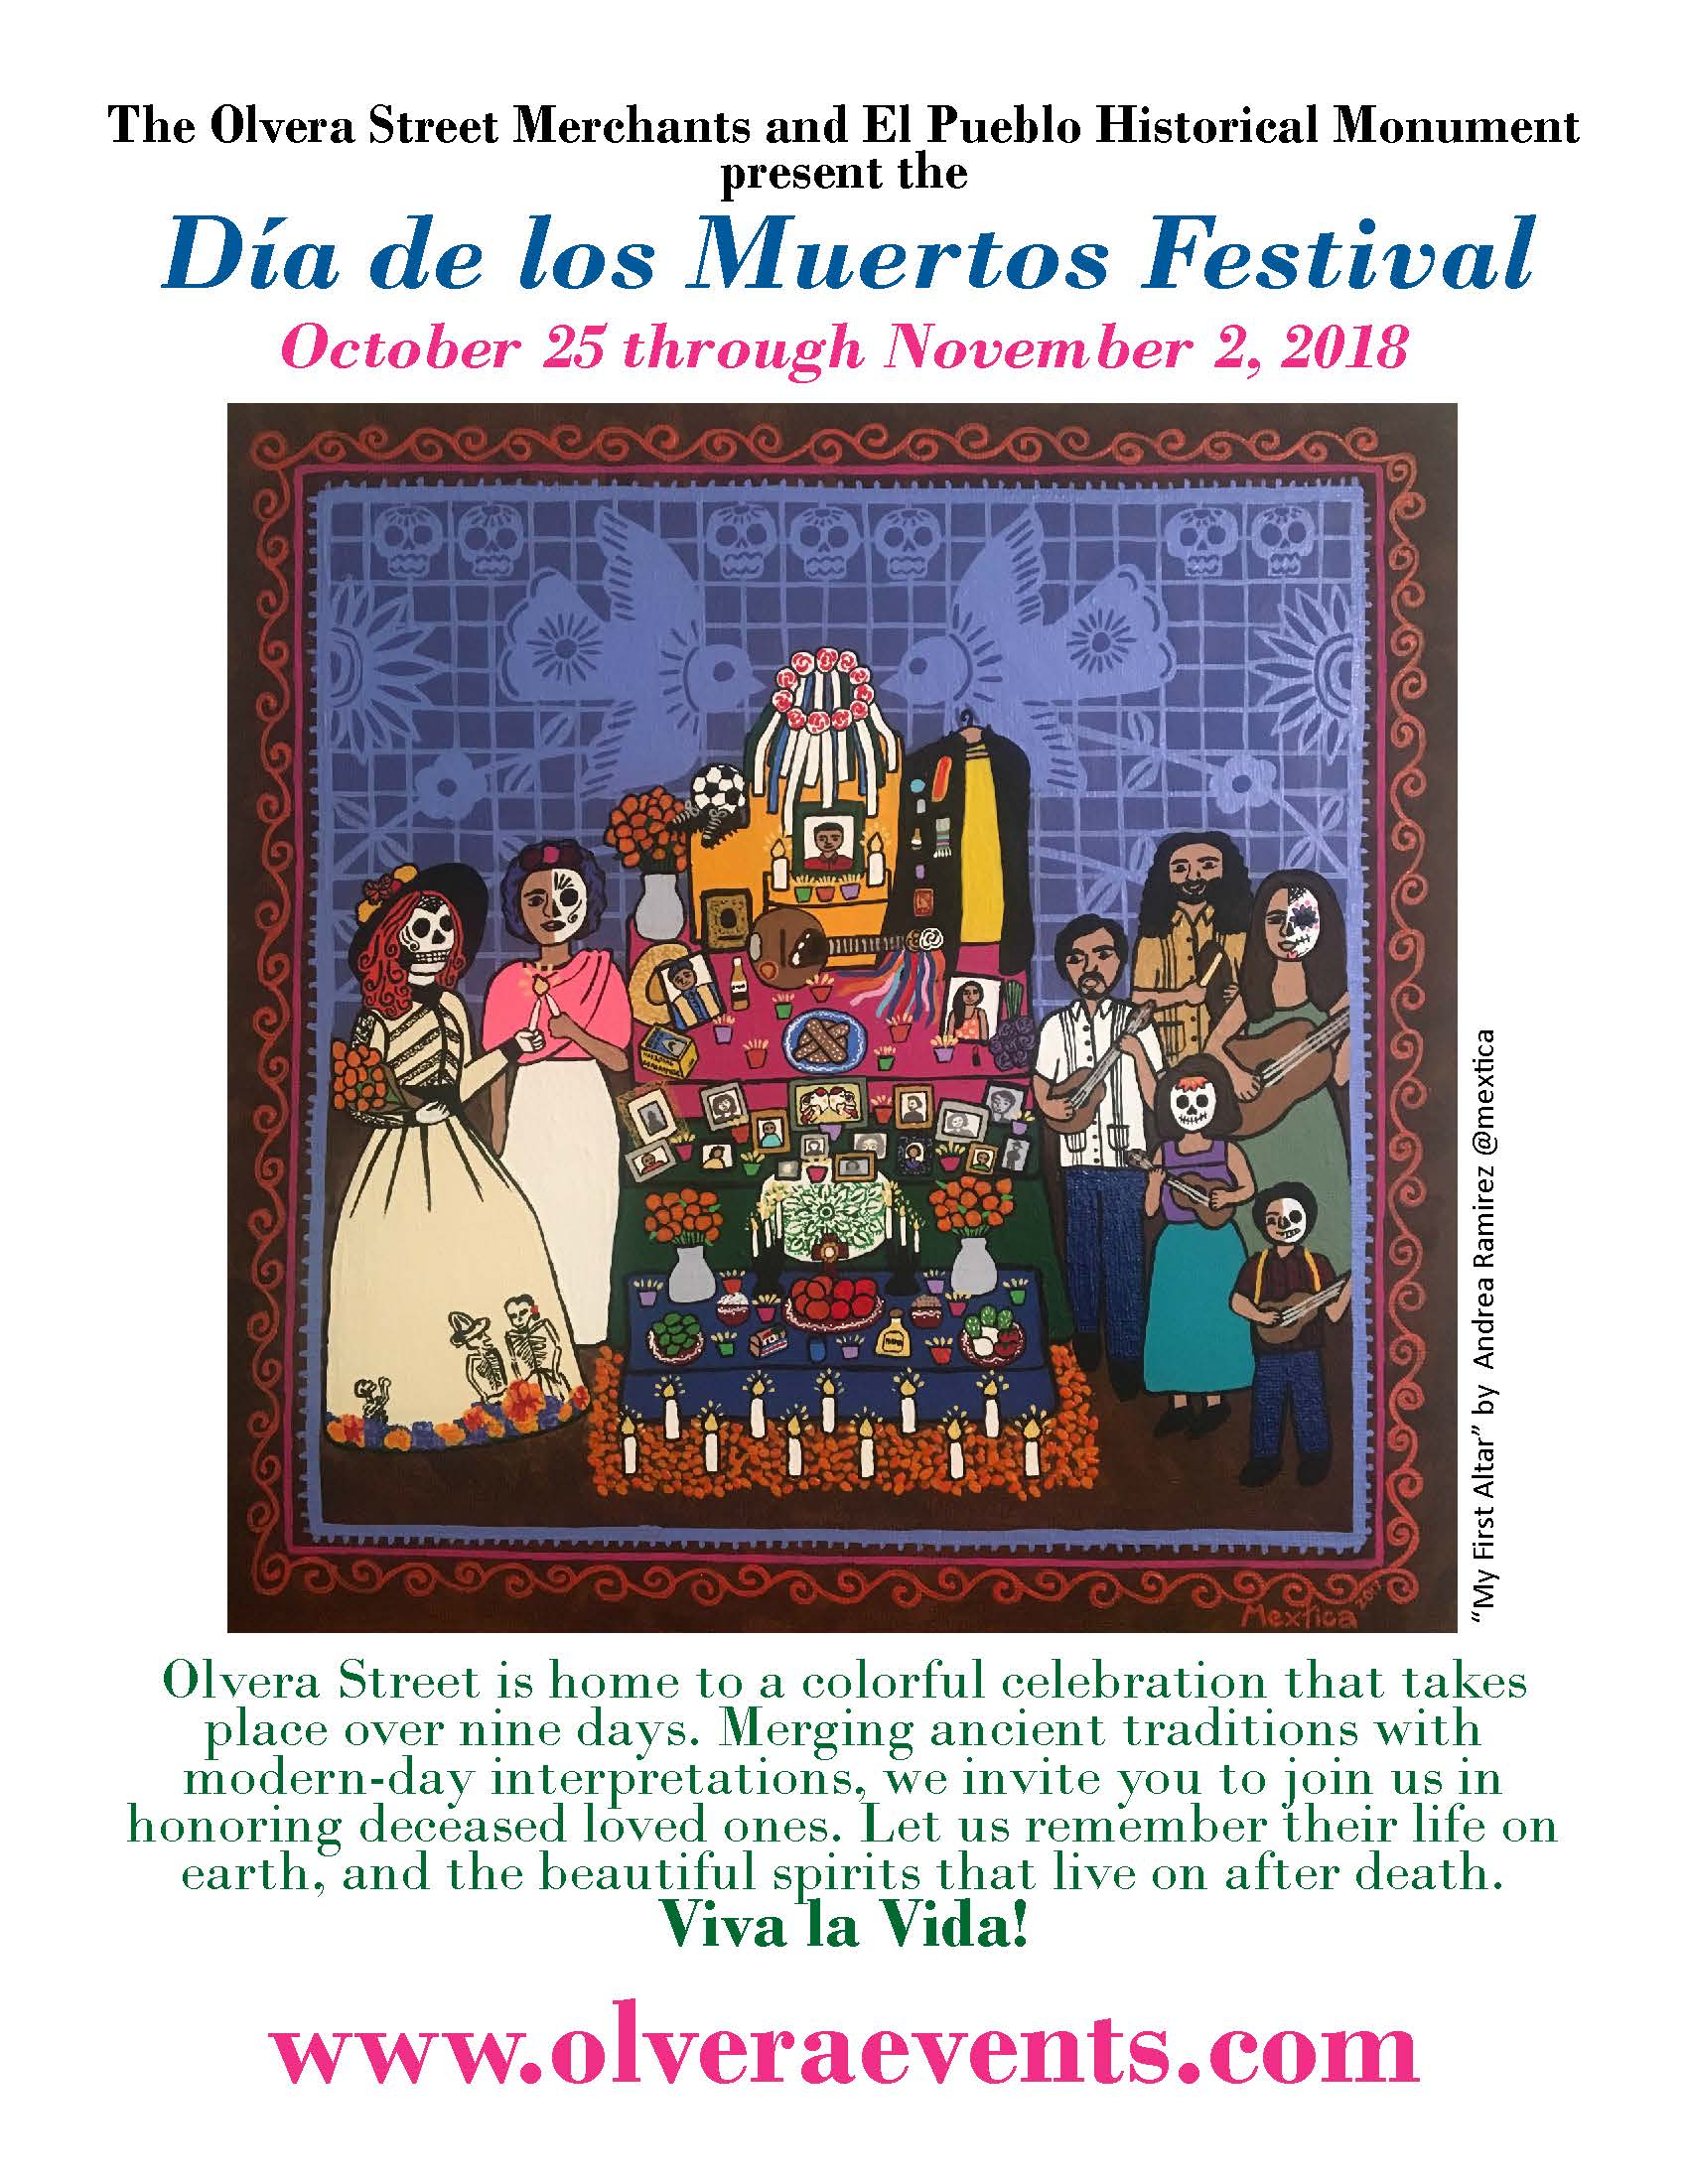 Angeles National Forest a Twitter: "Join us tomorrow and Friday at Día de los Muertos Festival @ElPuebloLA. Be sure to stop by the Gateway to Nature Center to check out